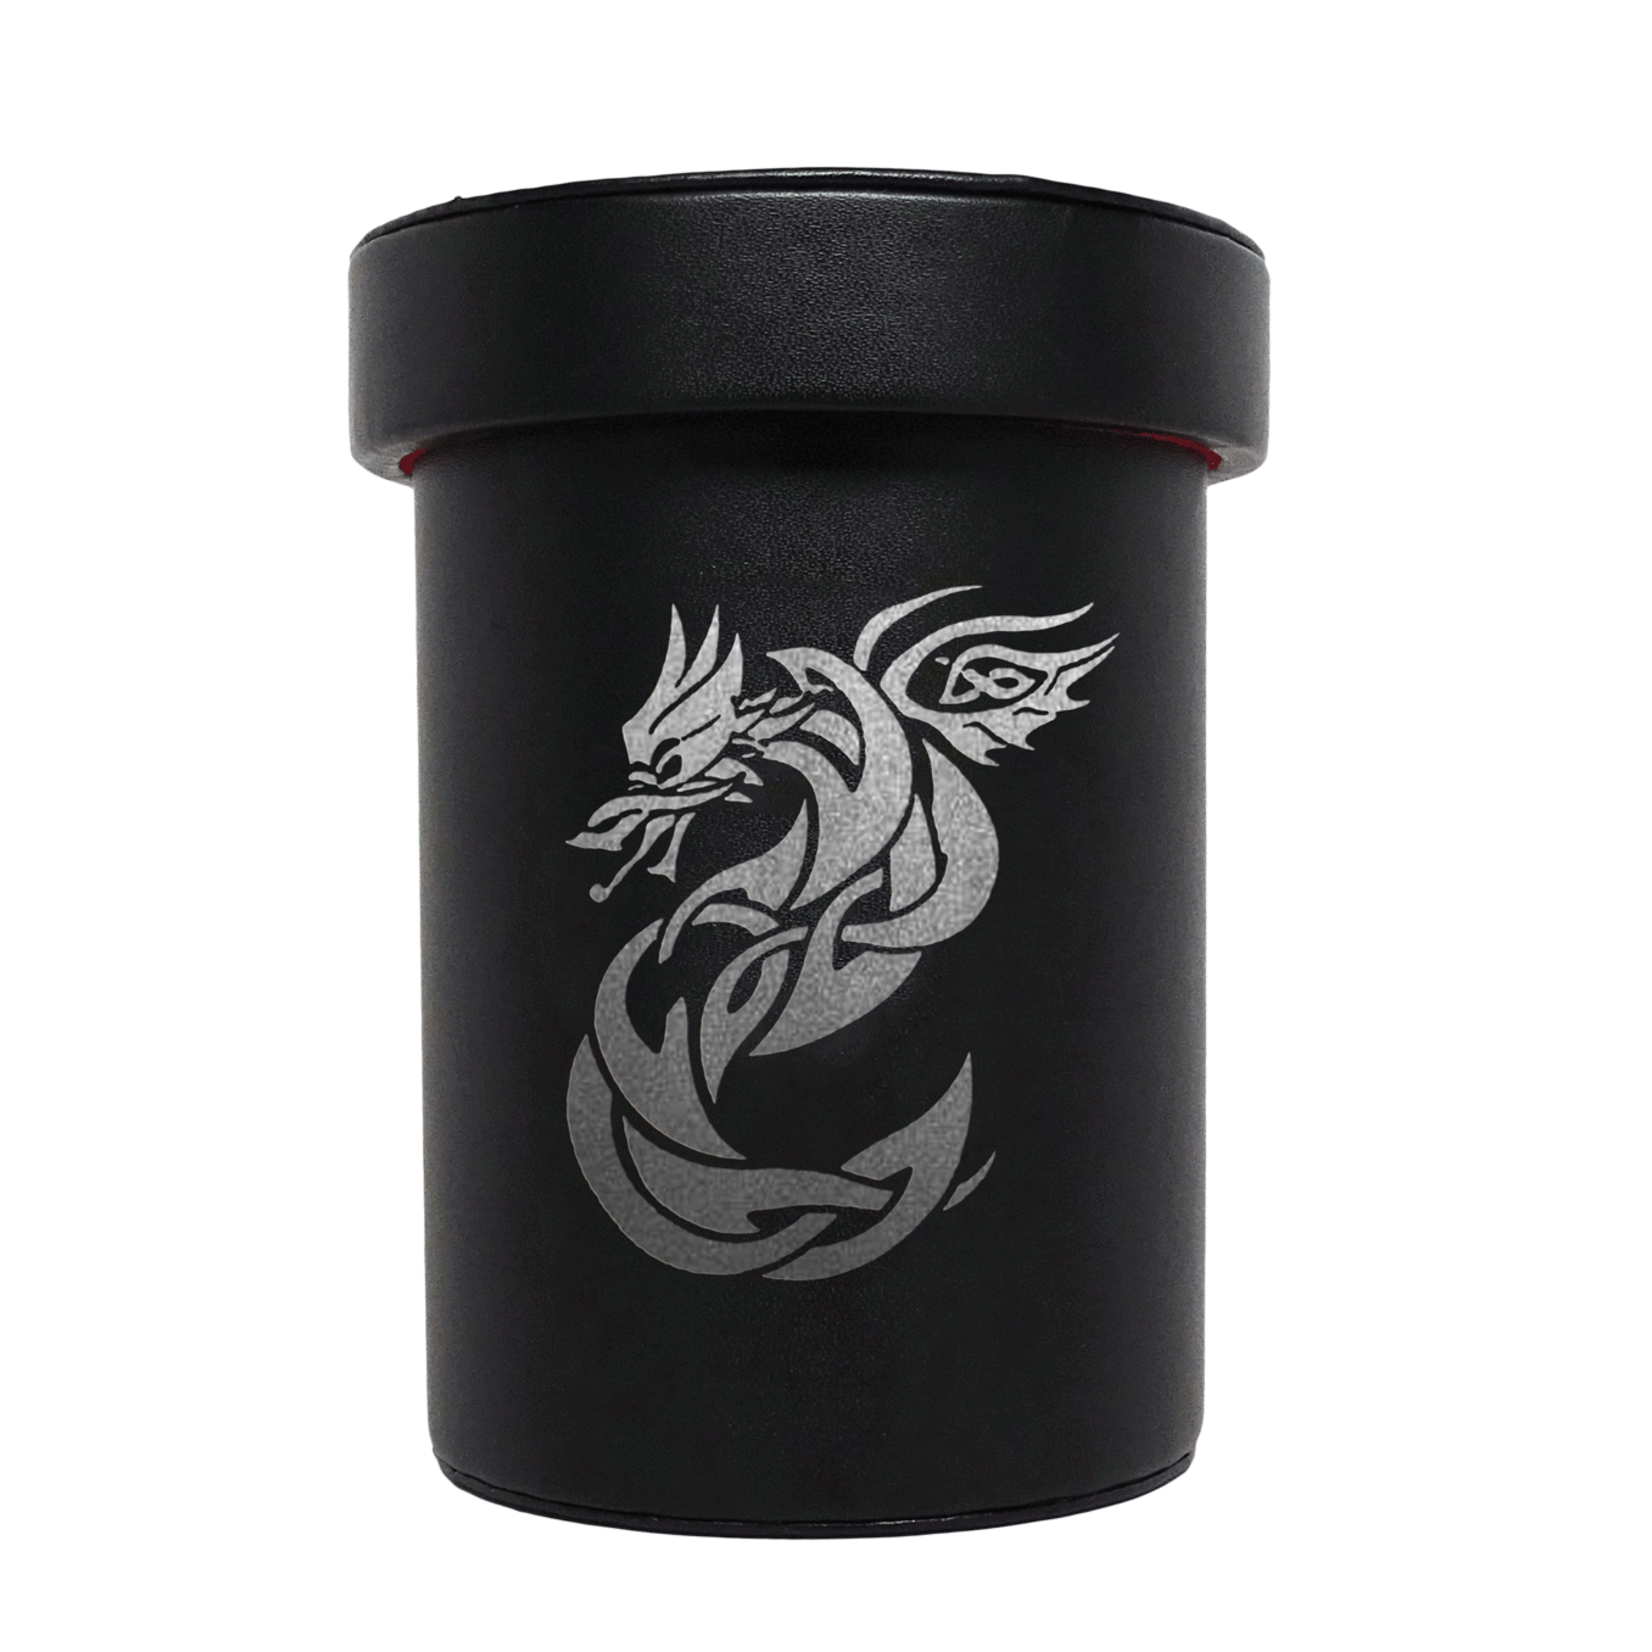 Dice Cup: Over Sized Black - Celtic Knot Dragon